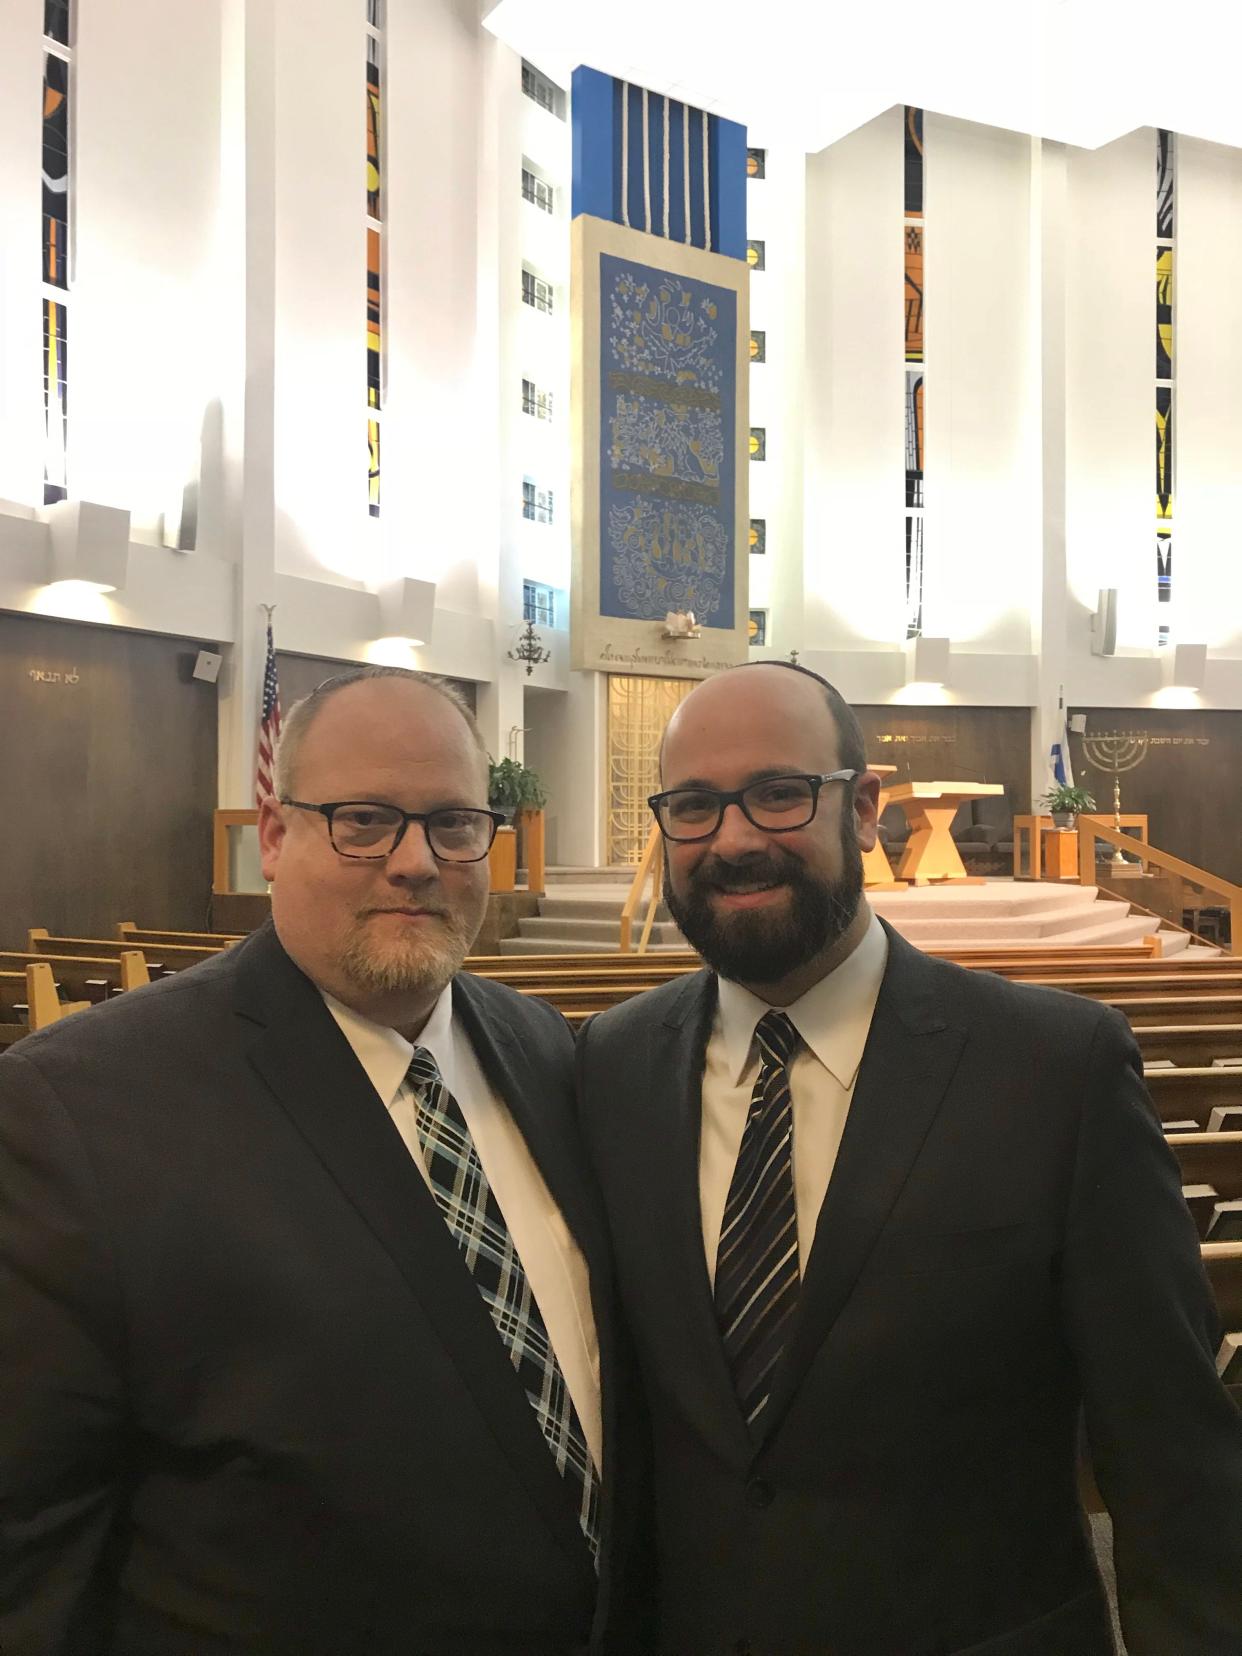 Rabbi Robert Gamer (left) of Congregation Beth Shalom in Oak Park and Rabbi Matthew Zerwekh of Temple Emanu-El in Oak Park, after an interfaith vigil at Congregation Beth Shalom on Oct. 30, 2018, to remember the victims of the Pittsburgh synagogue attack.